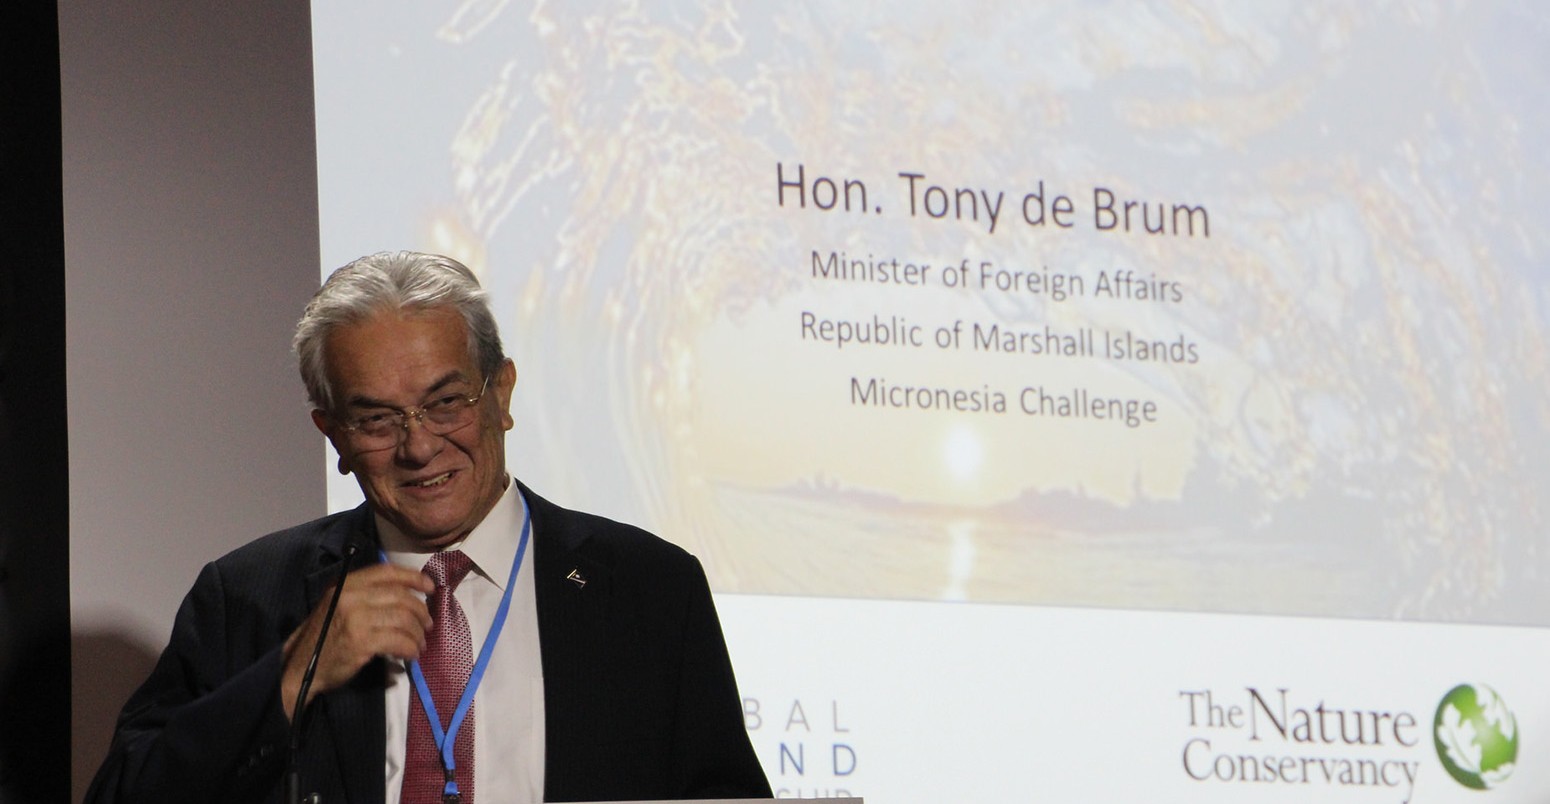 Tony De Brum at Regional Ocean Challenges: Pathways to Climate Finance for Small Island Developing States